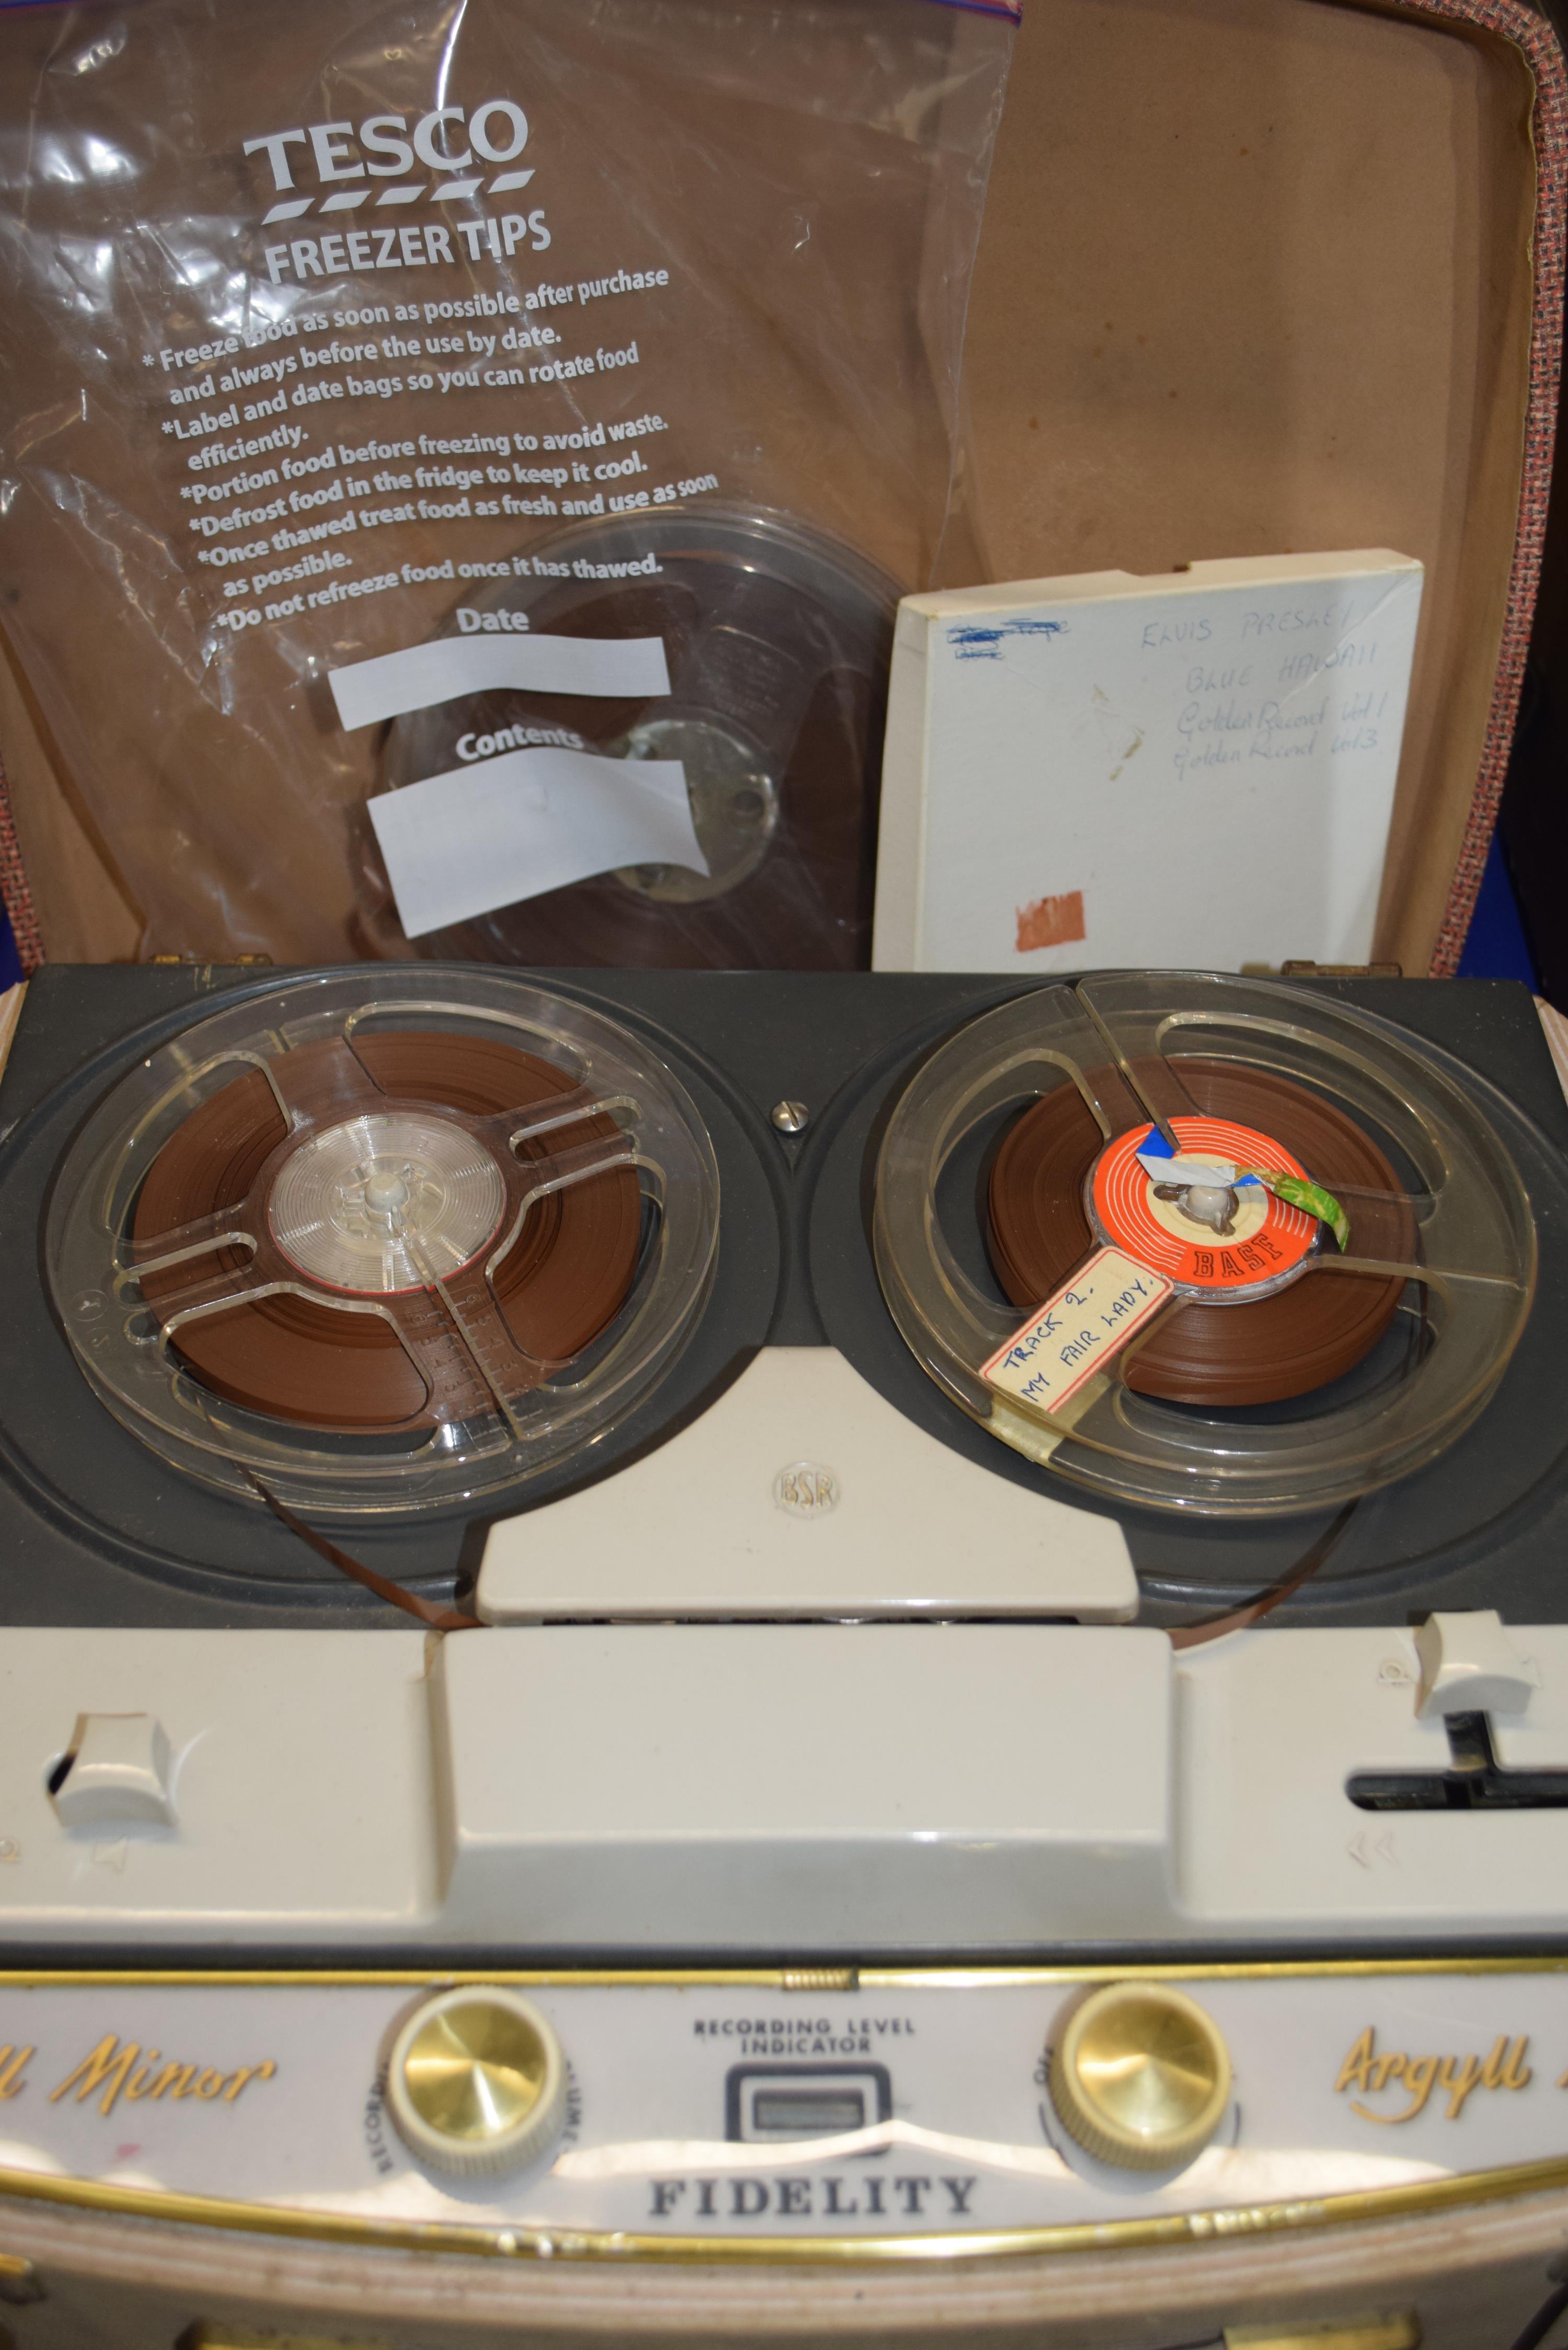 FIDELITY ARGYLE MINOR REEL TO REEL TAPE PLAYER AND TAPES